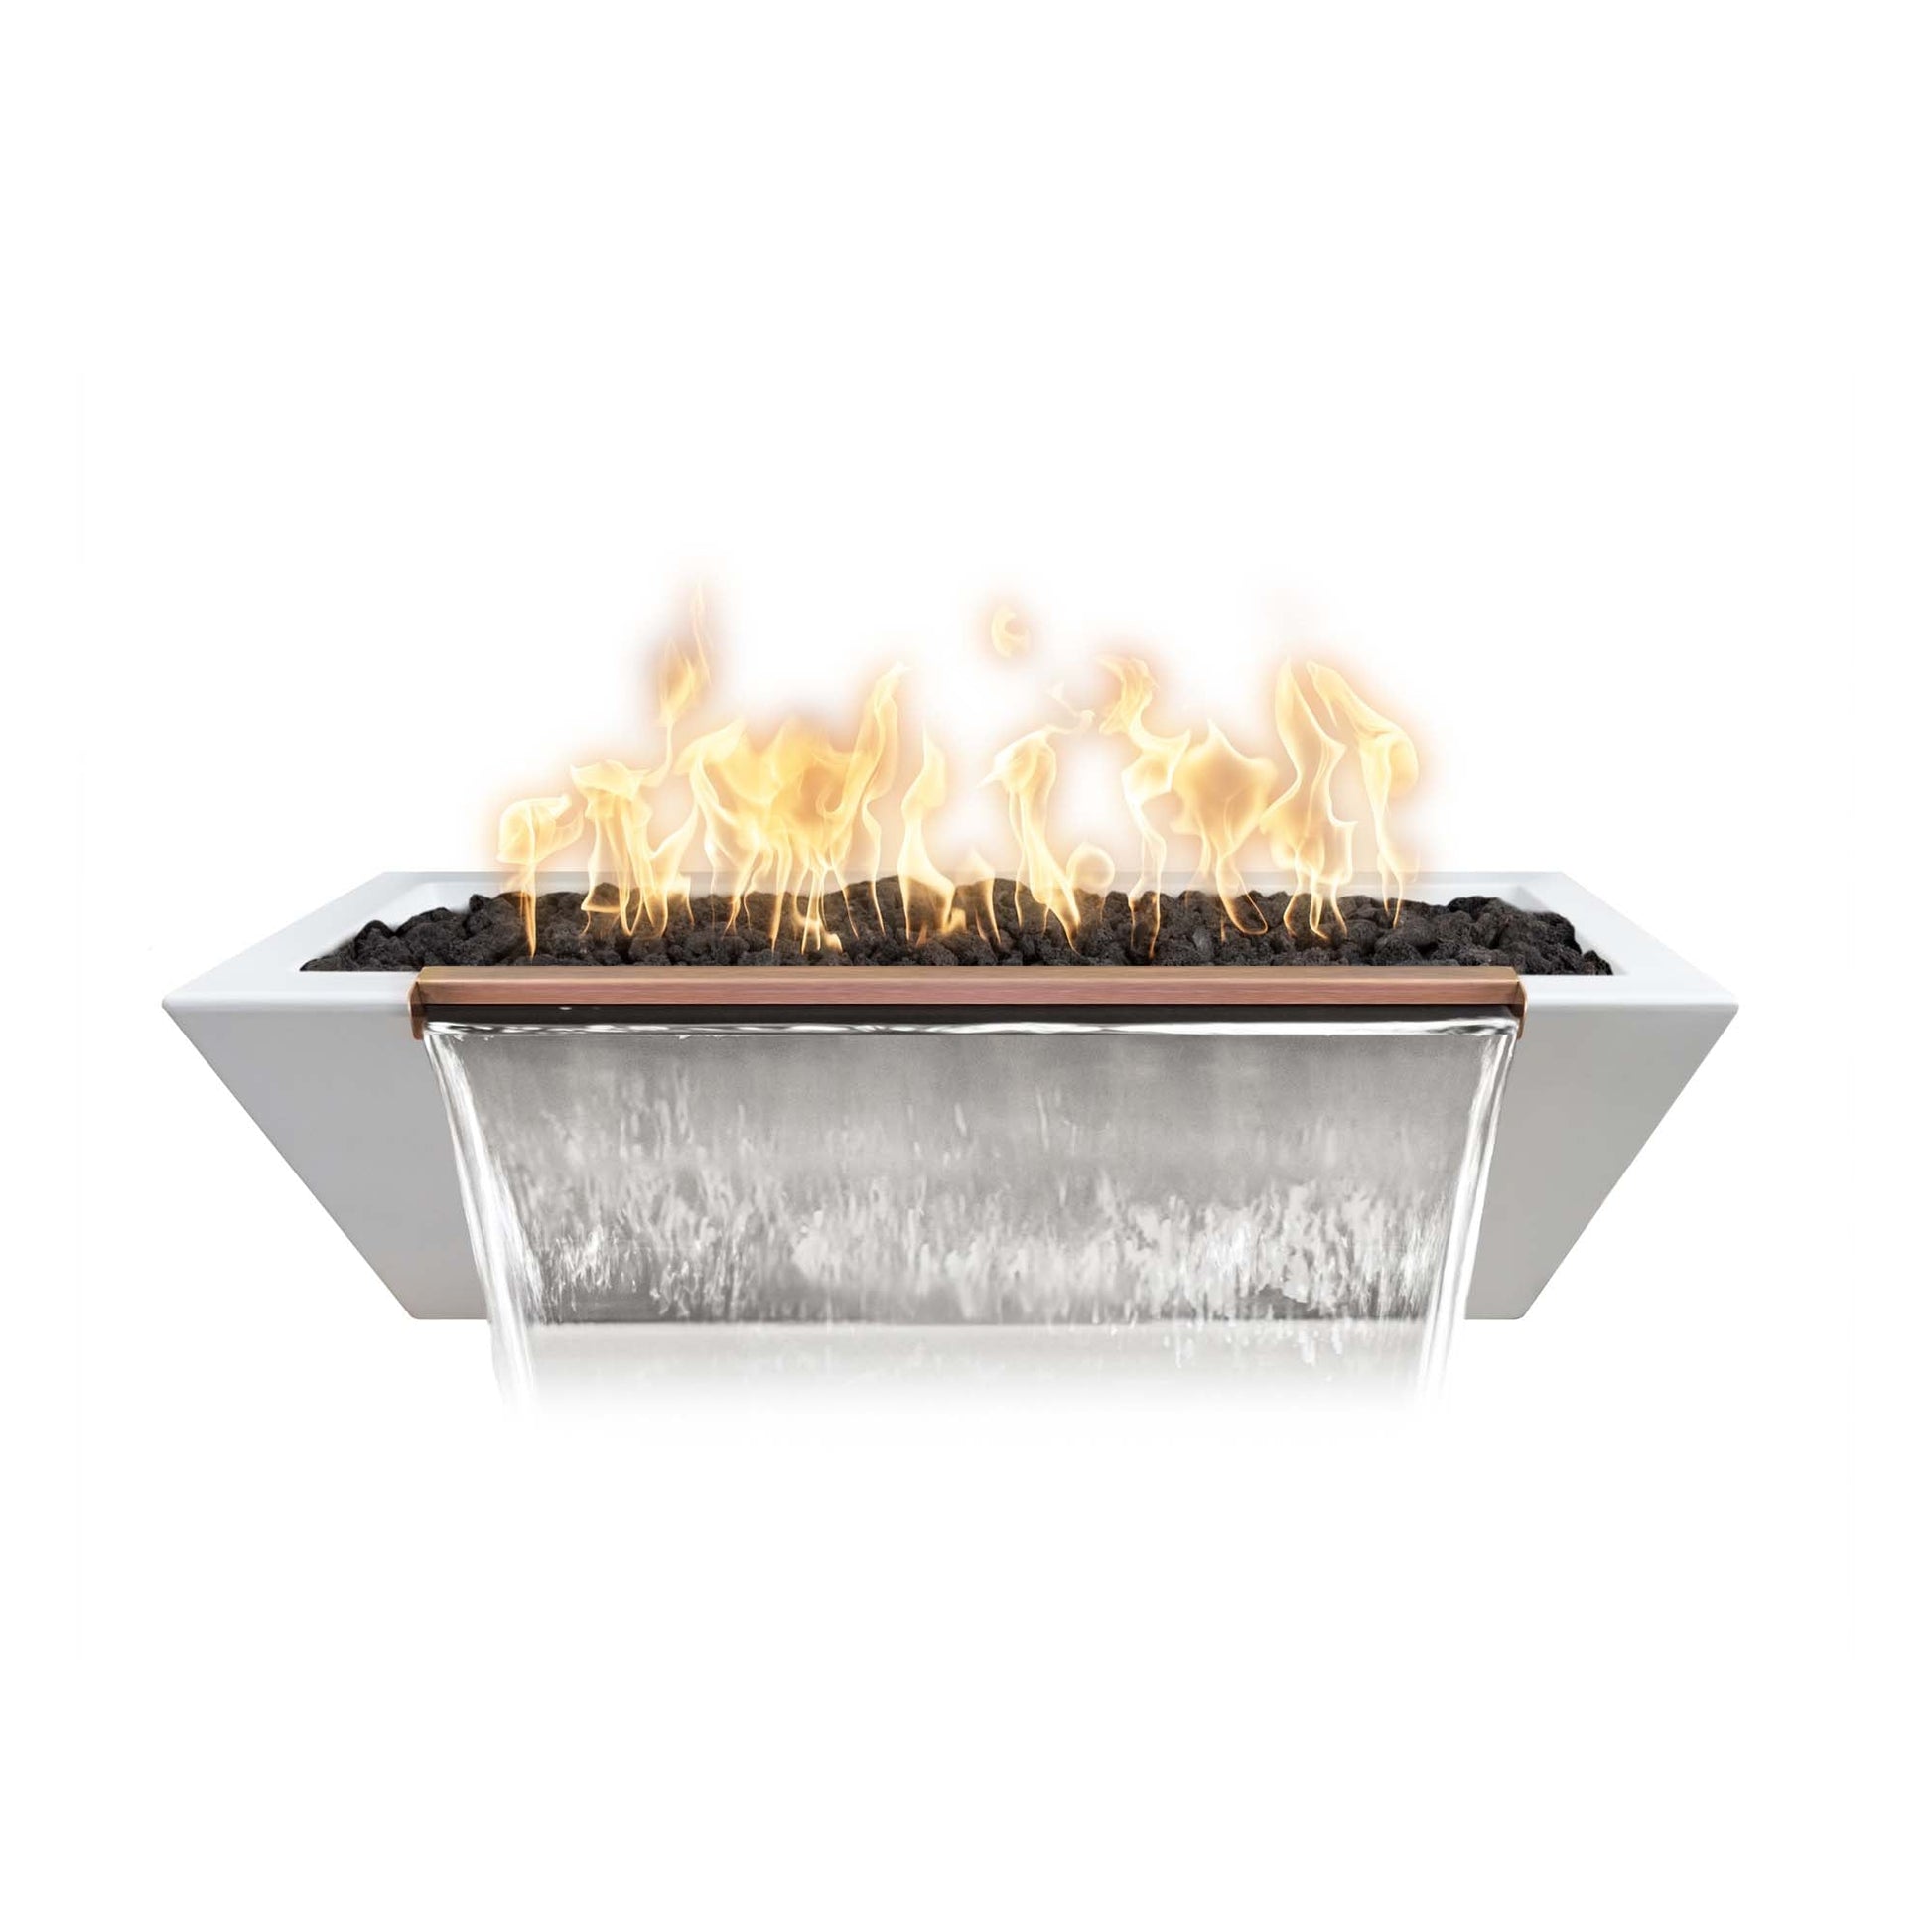 The Outdoor Plus Linear Maya 48" Metallic Bronze GFRC Concrete Natural Gas Fire & Water Bowl with Match Lit with Flame Sense Ignition